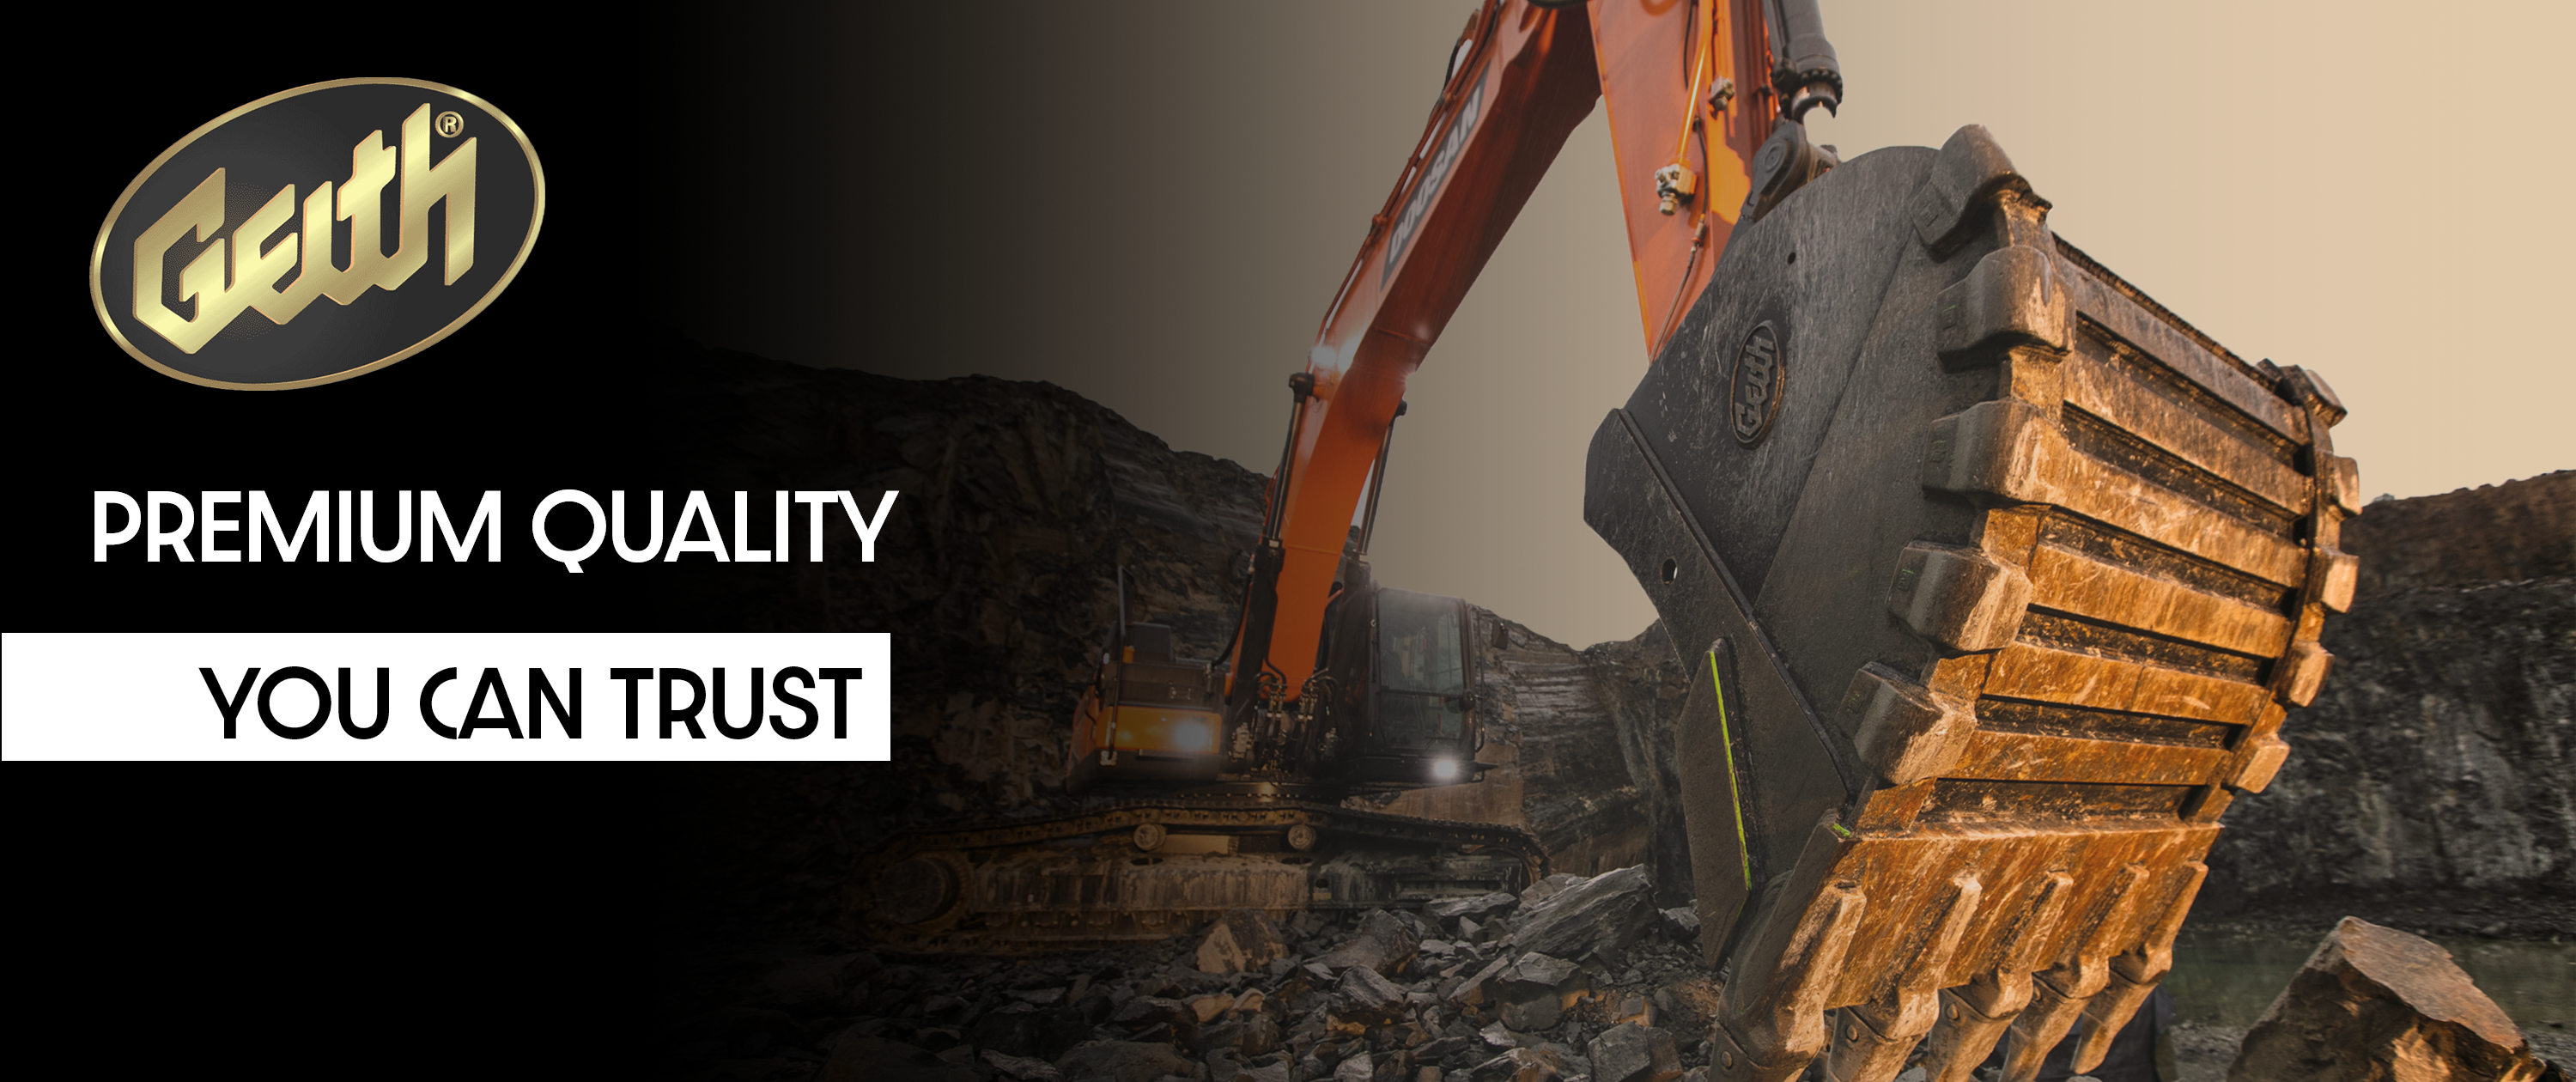 Geith® logo with 'Premium Quality You Can Trust' text, showcasing an orange excavator and rugged Geith® attachment in a rocky excavation site.